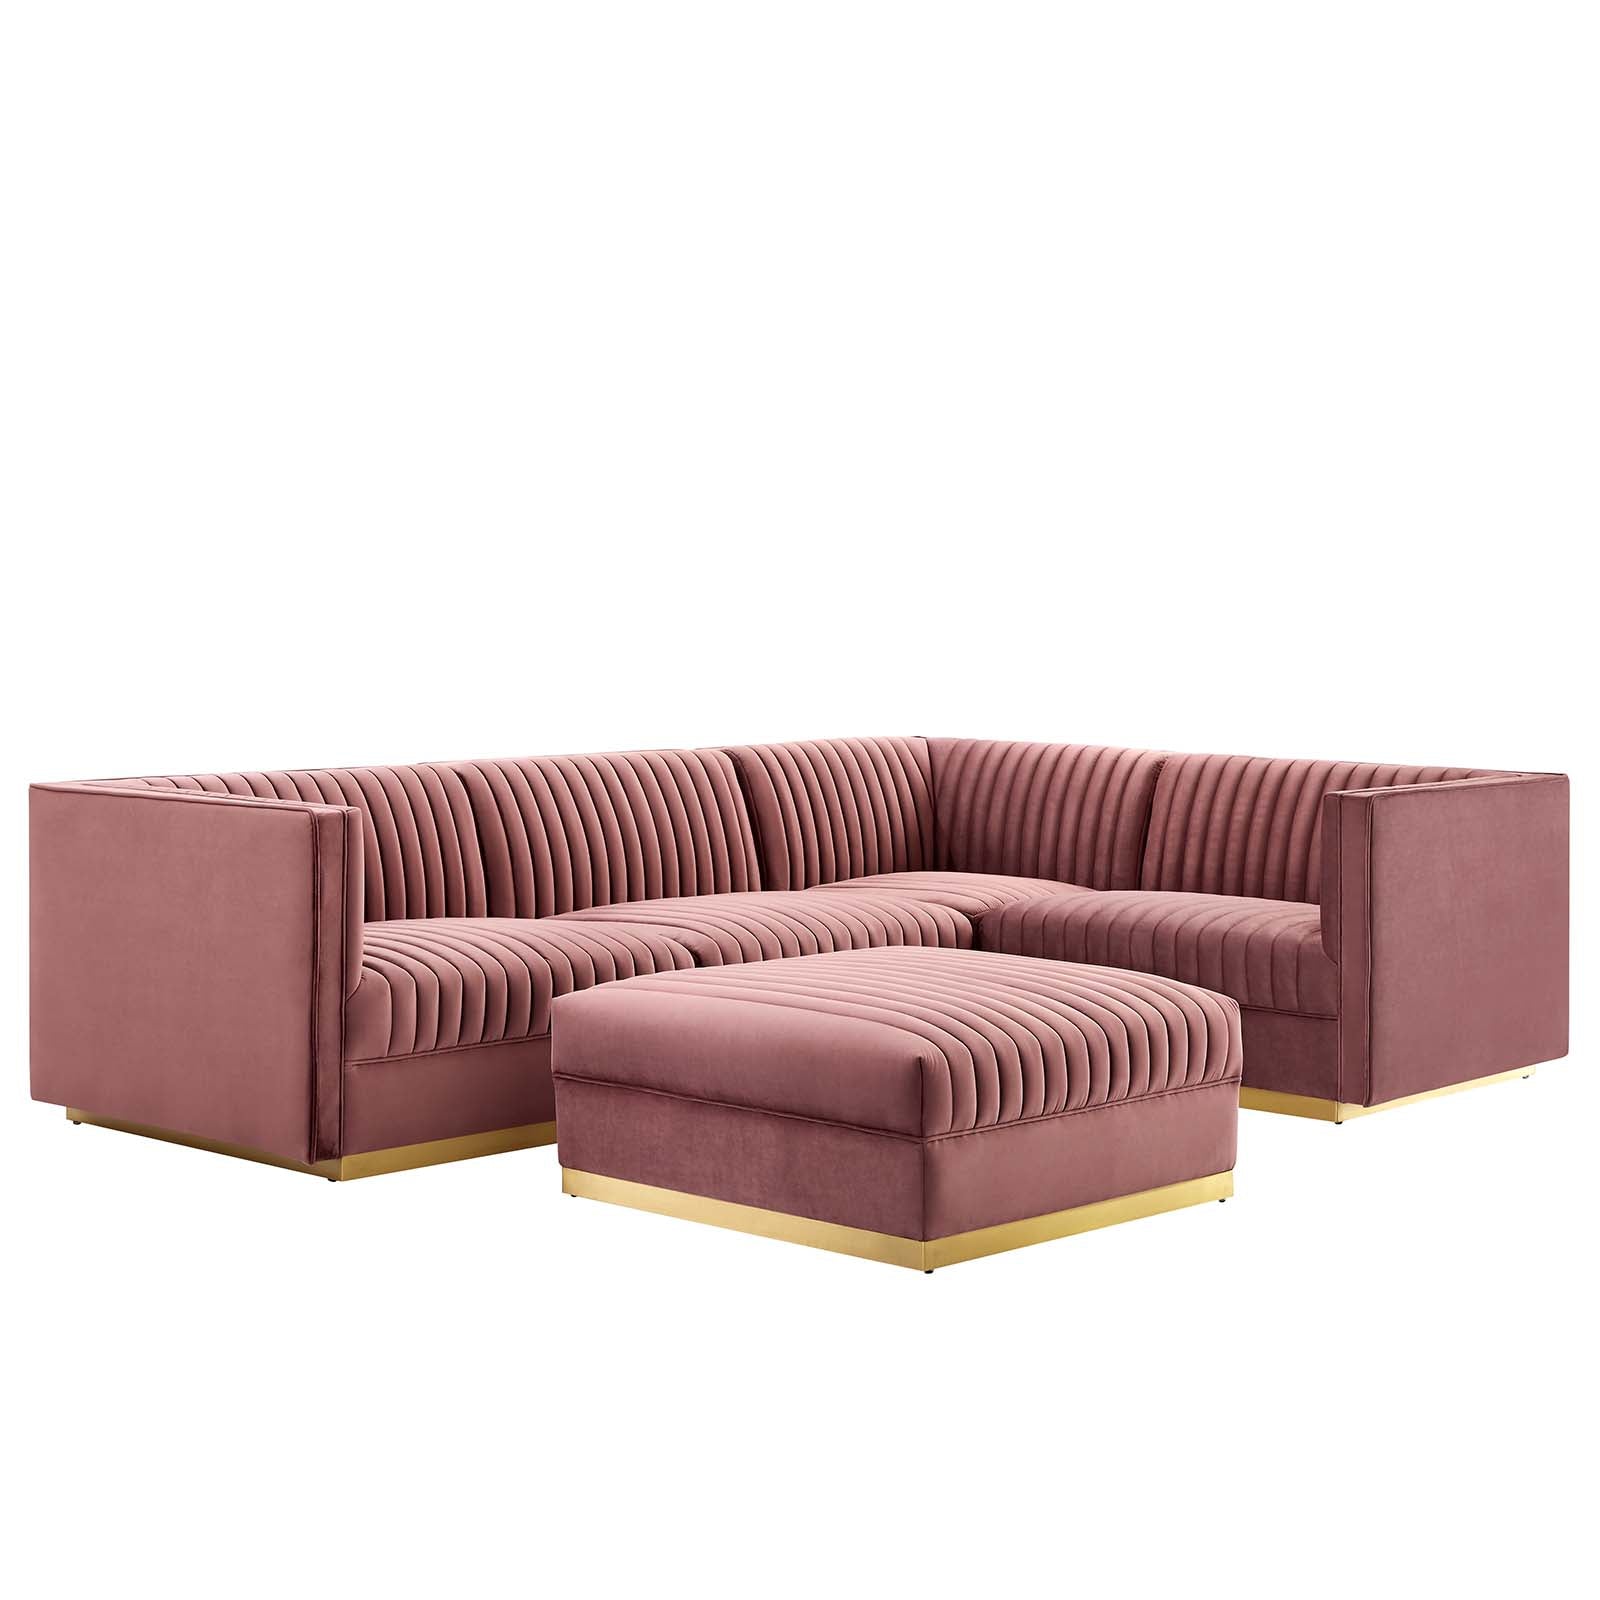 Sanguine Channel Tufted Performance Velvet 5-Piece Right-Facing Modular Sectional Sofa - East Shore Modern Home Furnishings